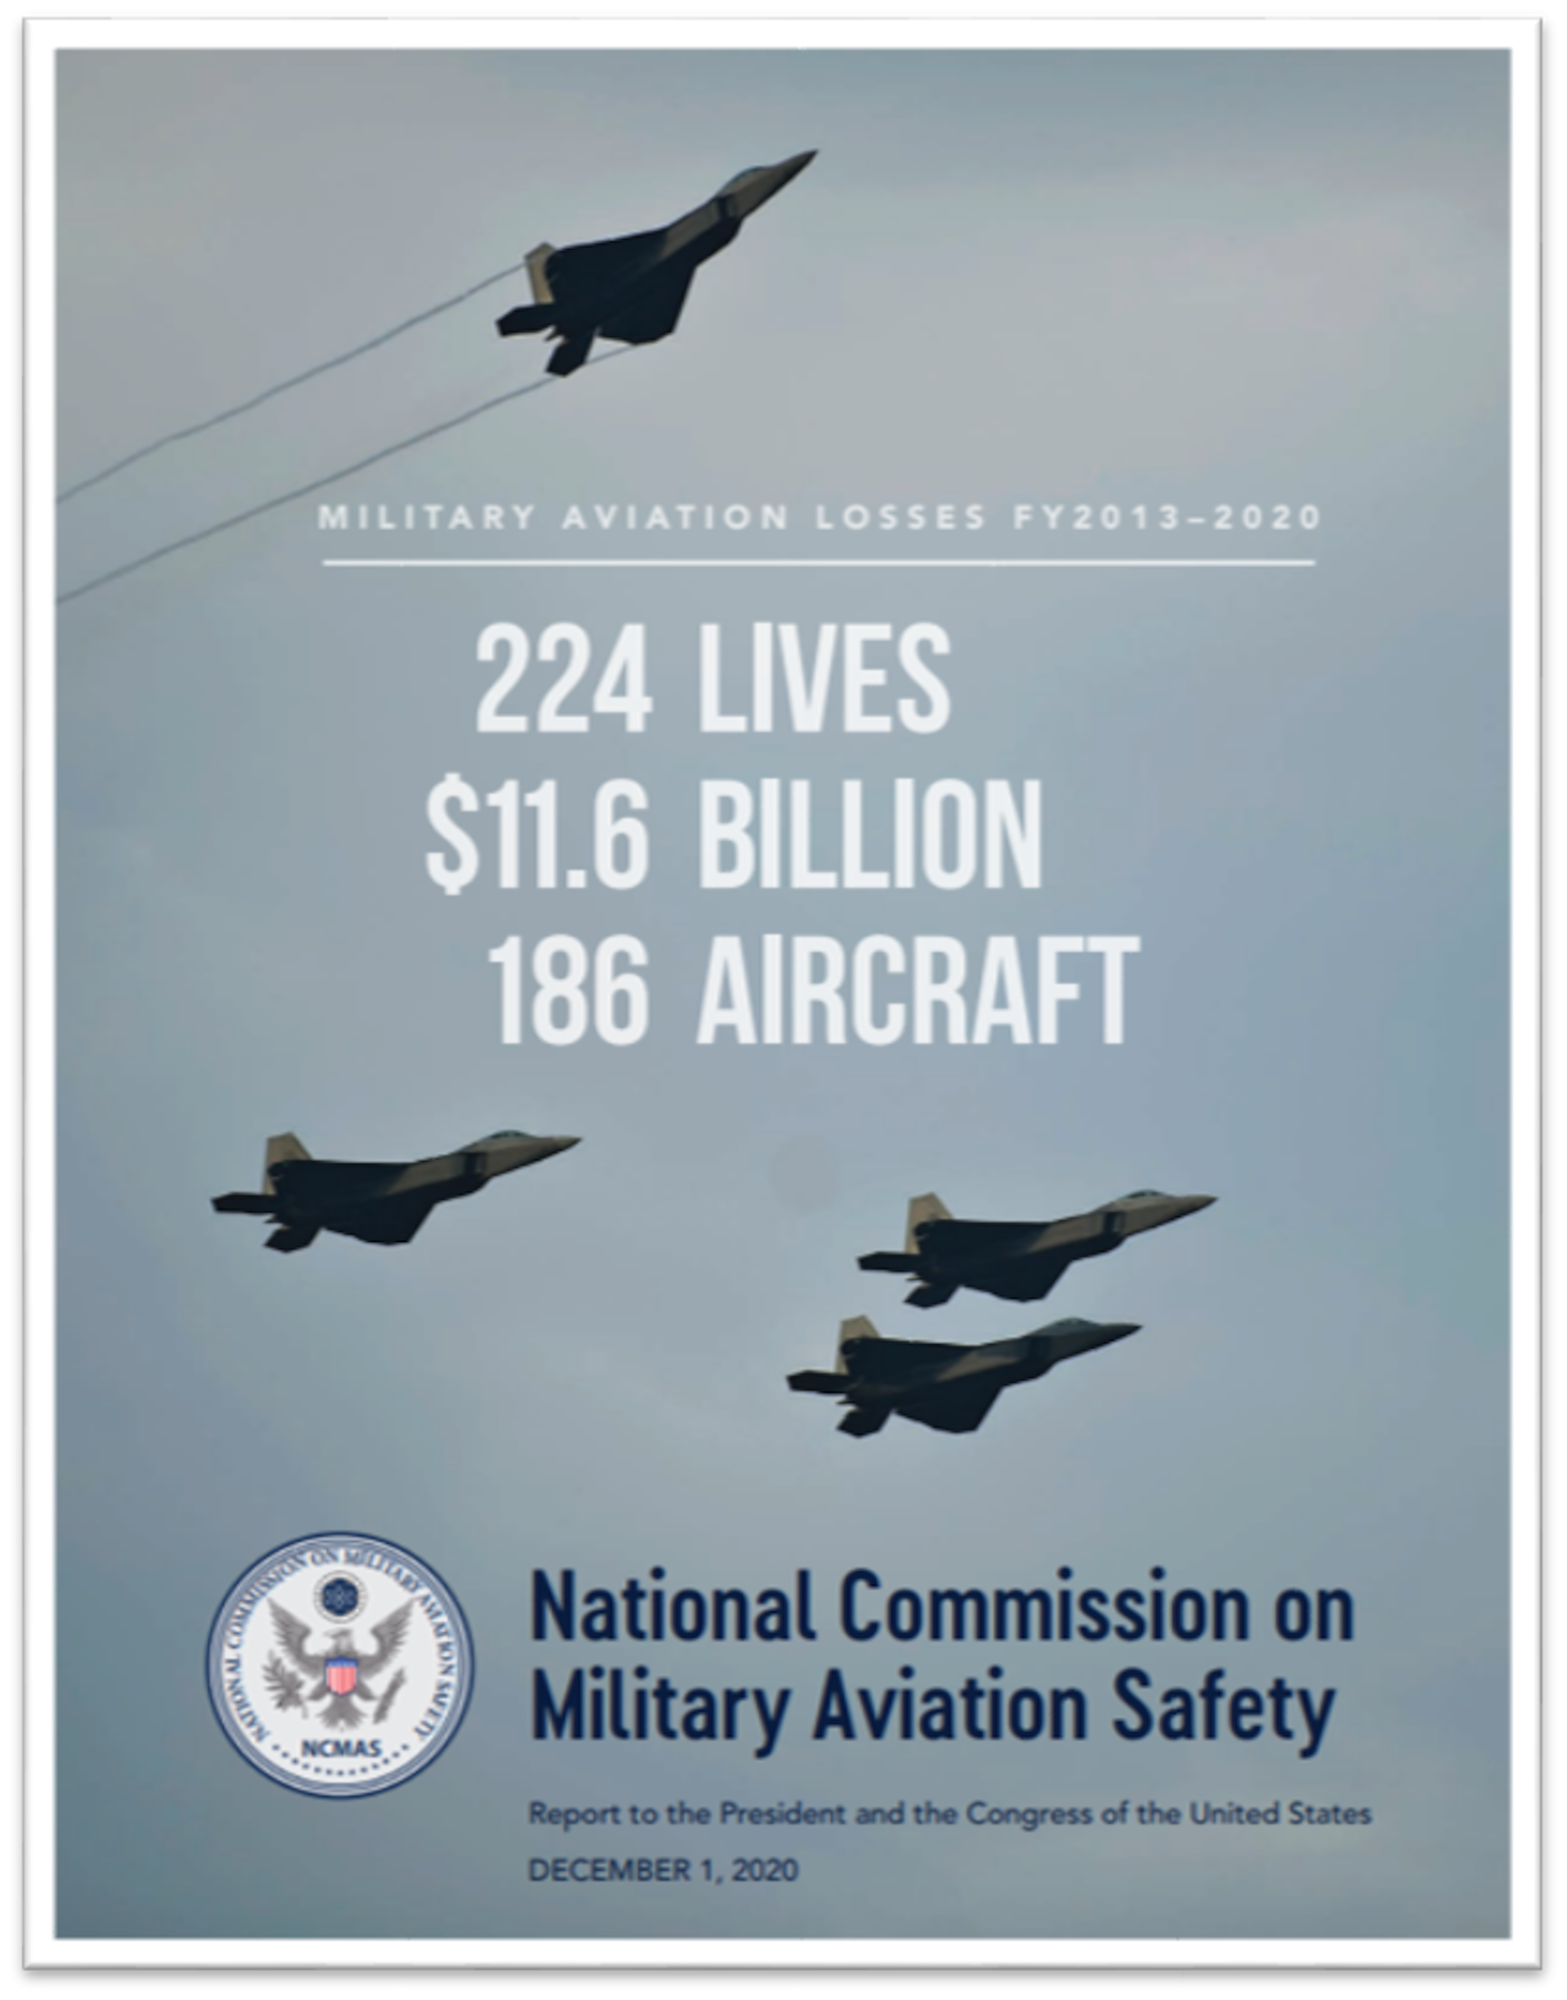 The cover page of the National Commission on Military Aviation Safety report. (Courtesy image)